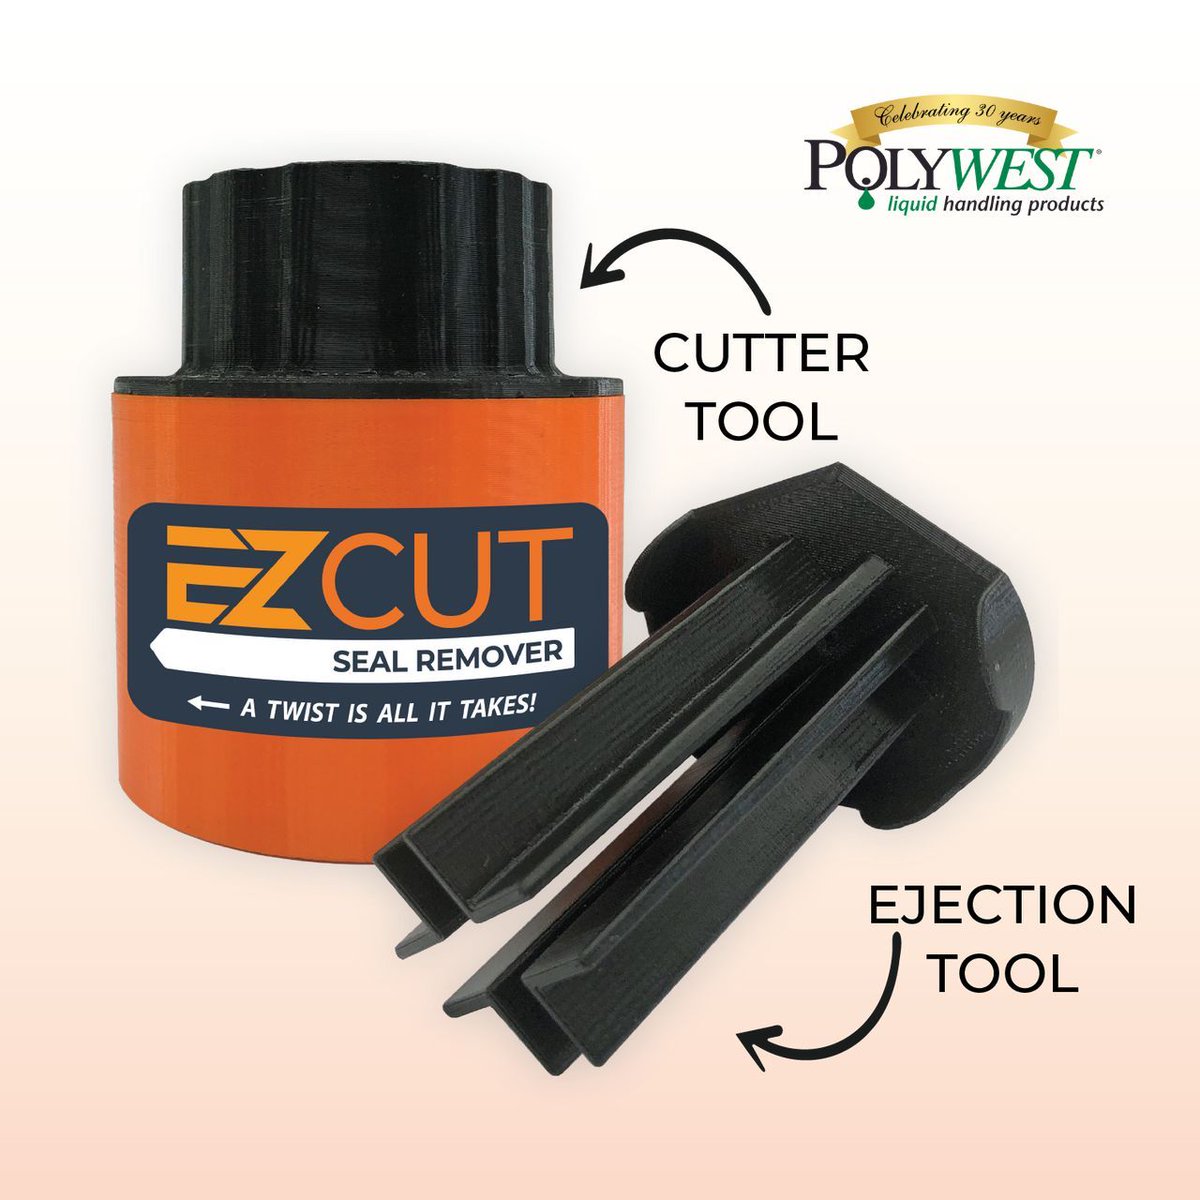 The EZ-Cut Seal Remover is quick, easy and efficient. This tool safely removes and holds seals from chemical containers without making contact with dangerous chemicals, making your job safer. Call 1-855-765-9937 for more information, or reach out to your local Polywest dealer!